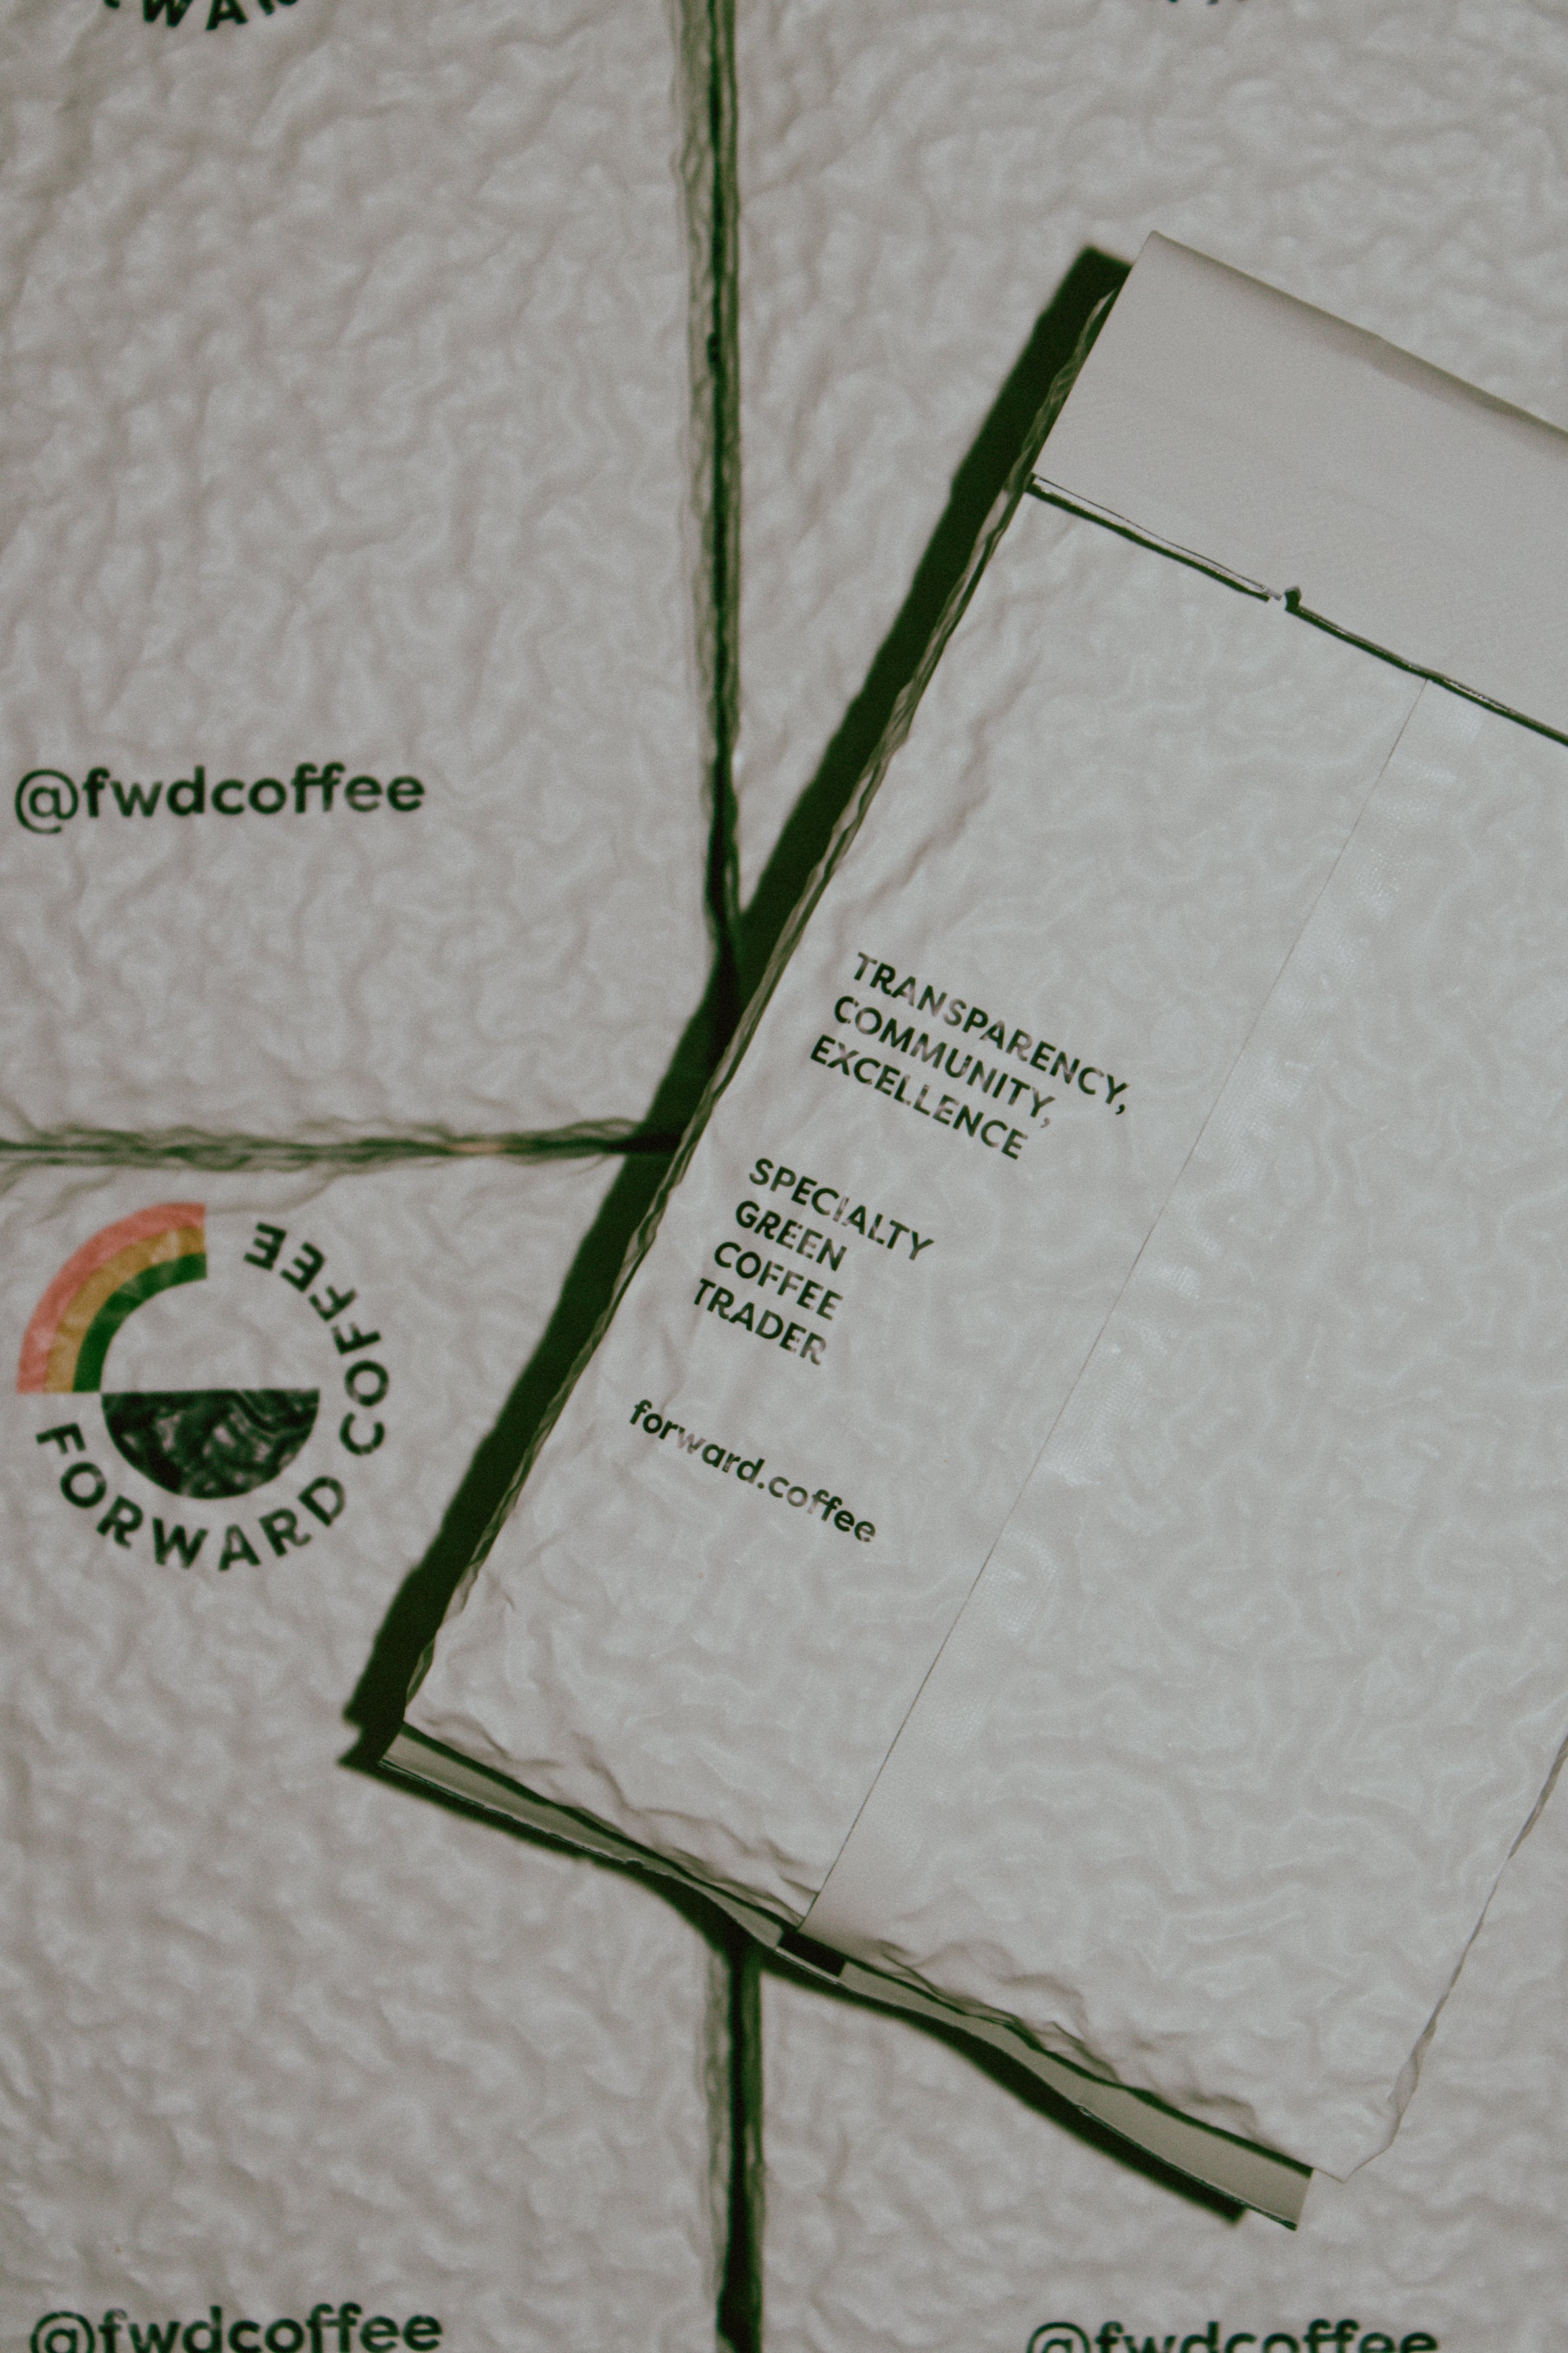 Forward Specialty Green Coffee Traders